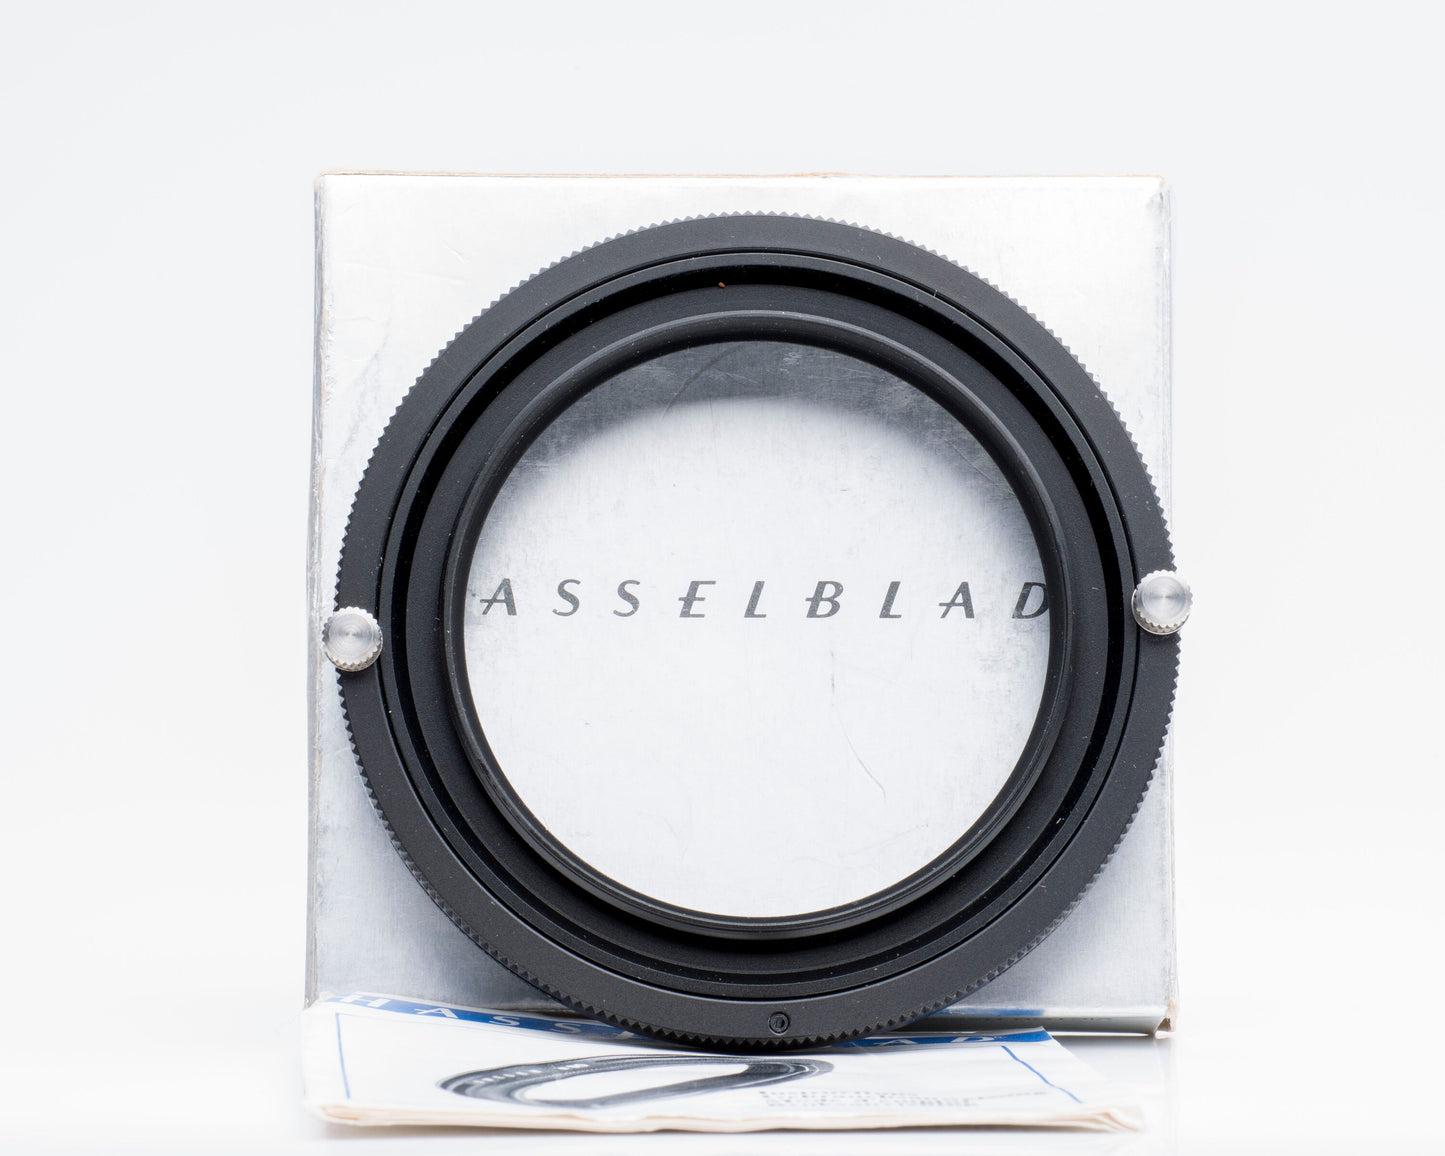 Hasselblad Bay 63 Lens Mounting Ring 40684